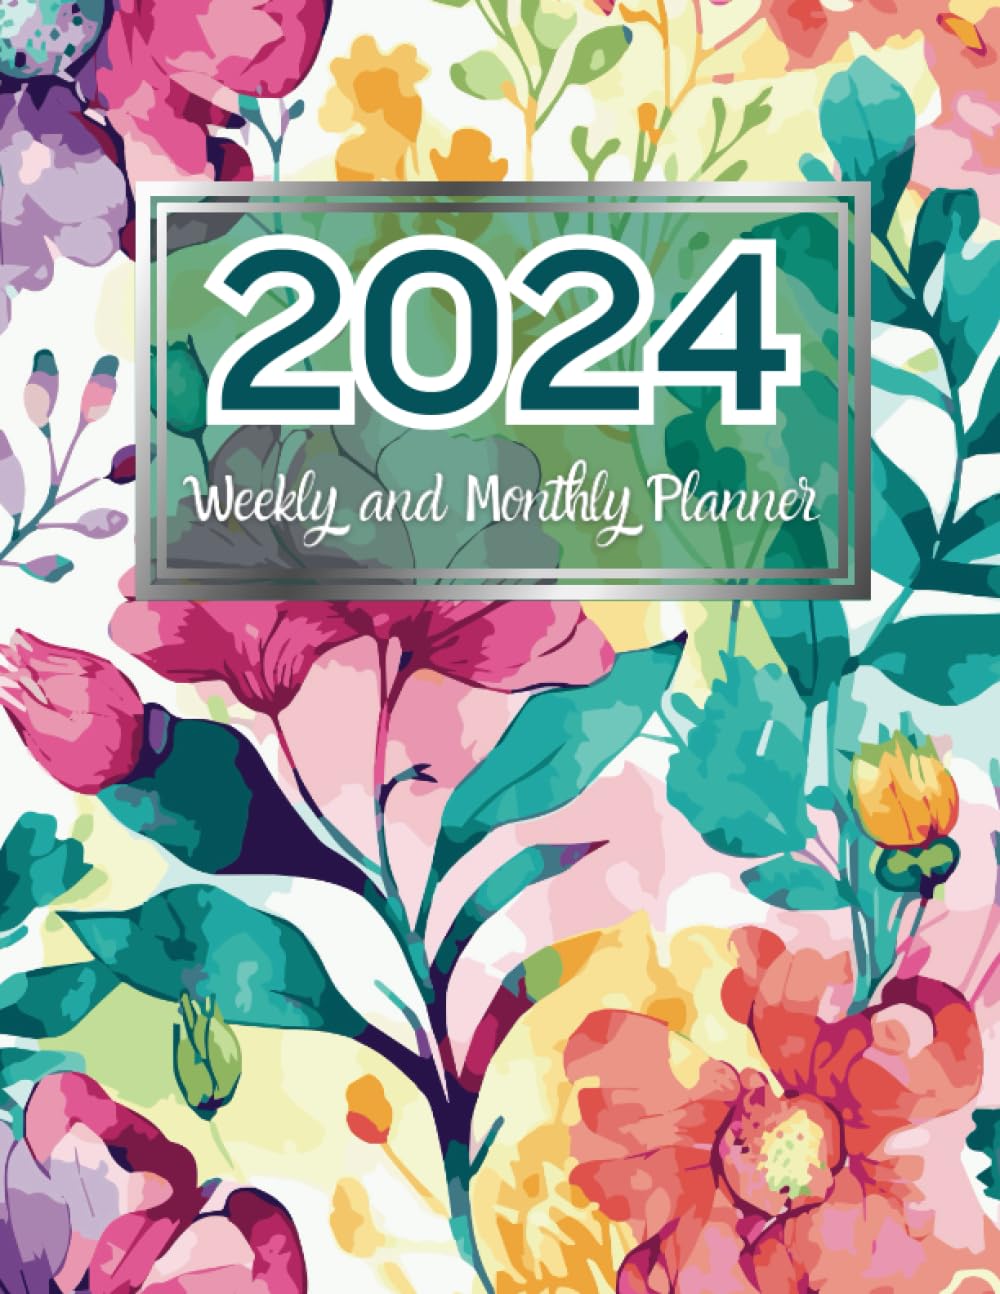 2024 Weekly and Monthly Planner: January to December with Federal Holidays and Inspirational Quotes | Password Log and Contact | Large Beautiful Floral Cover